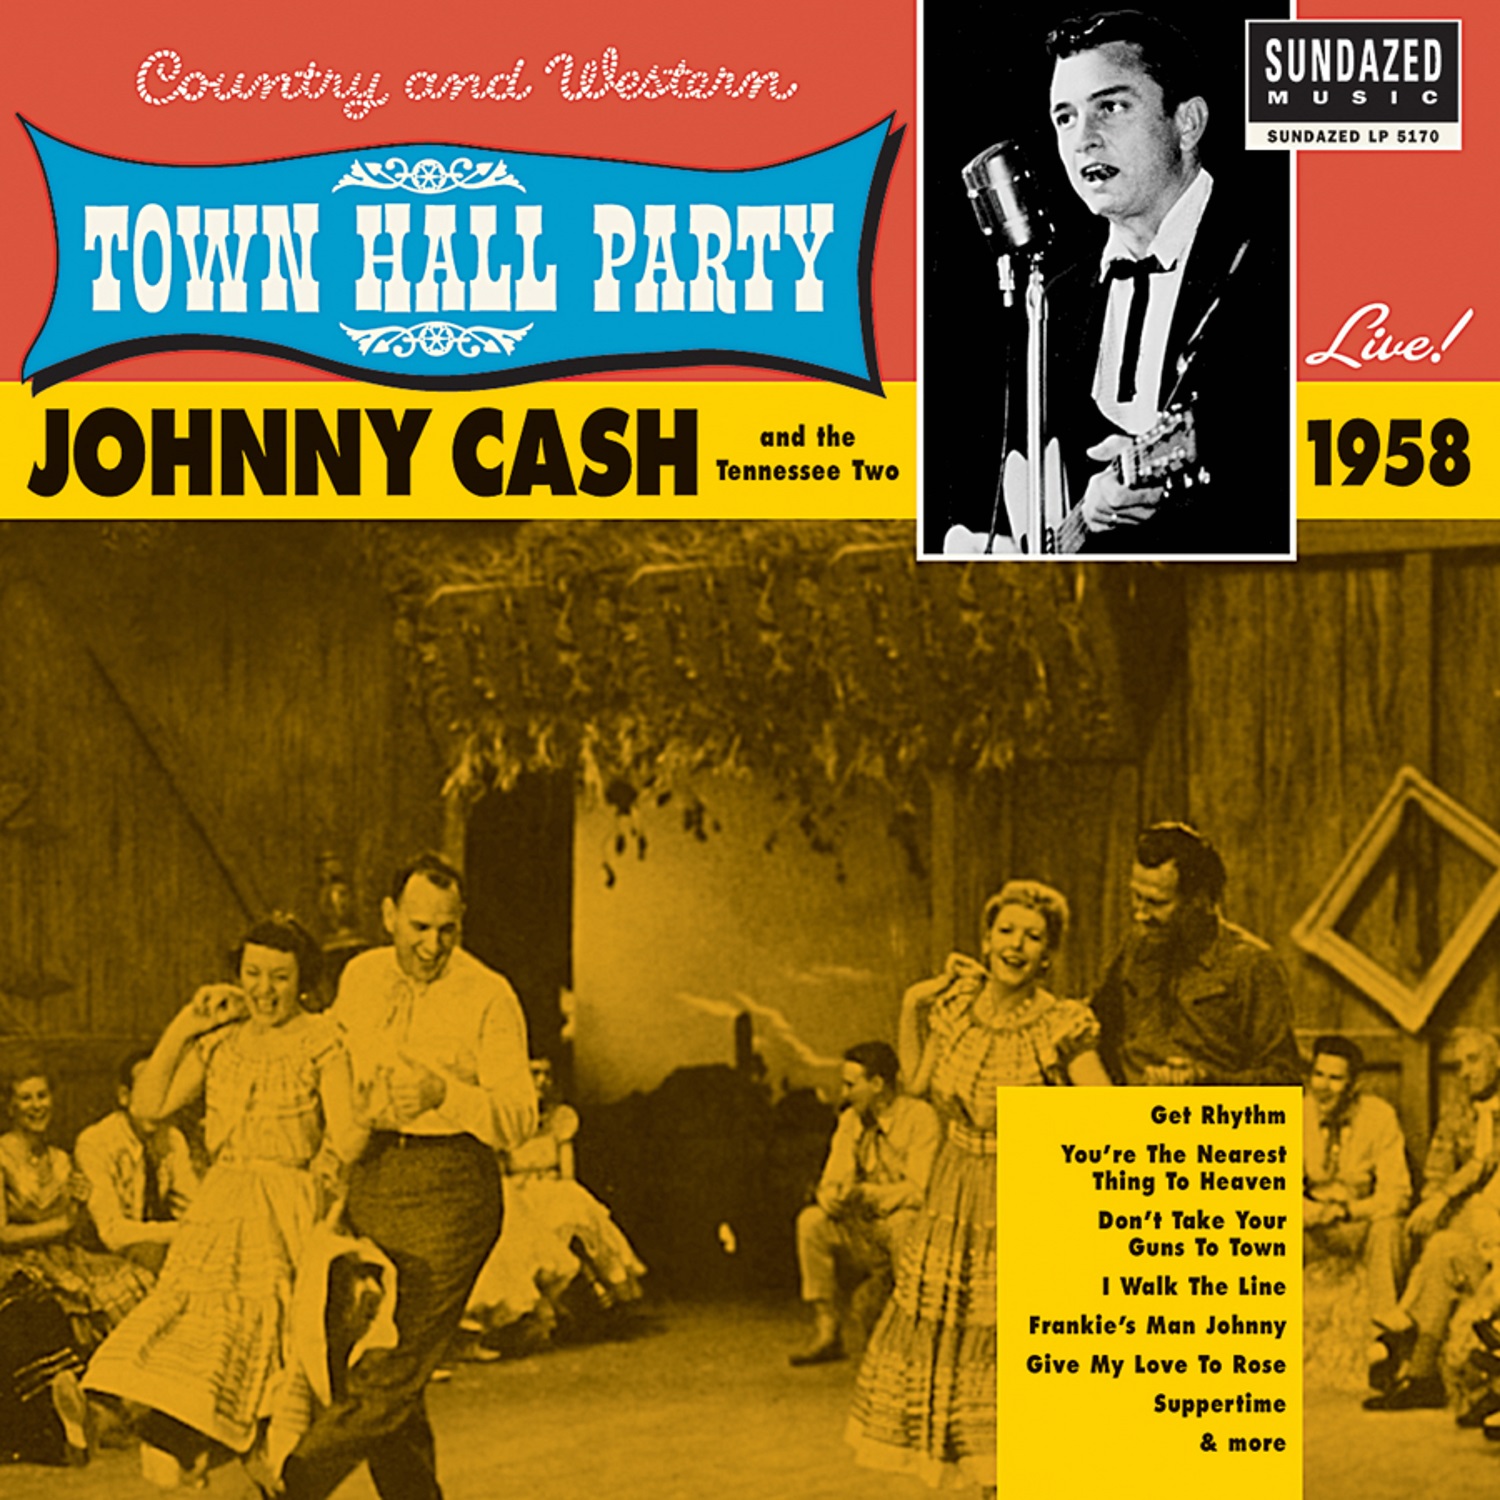 Johnny Cash - Johnny Cash Live At Town Hall Party 1958 - LP